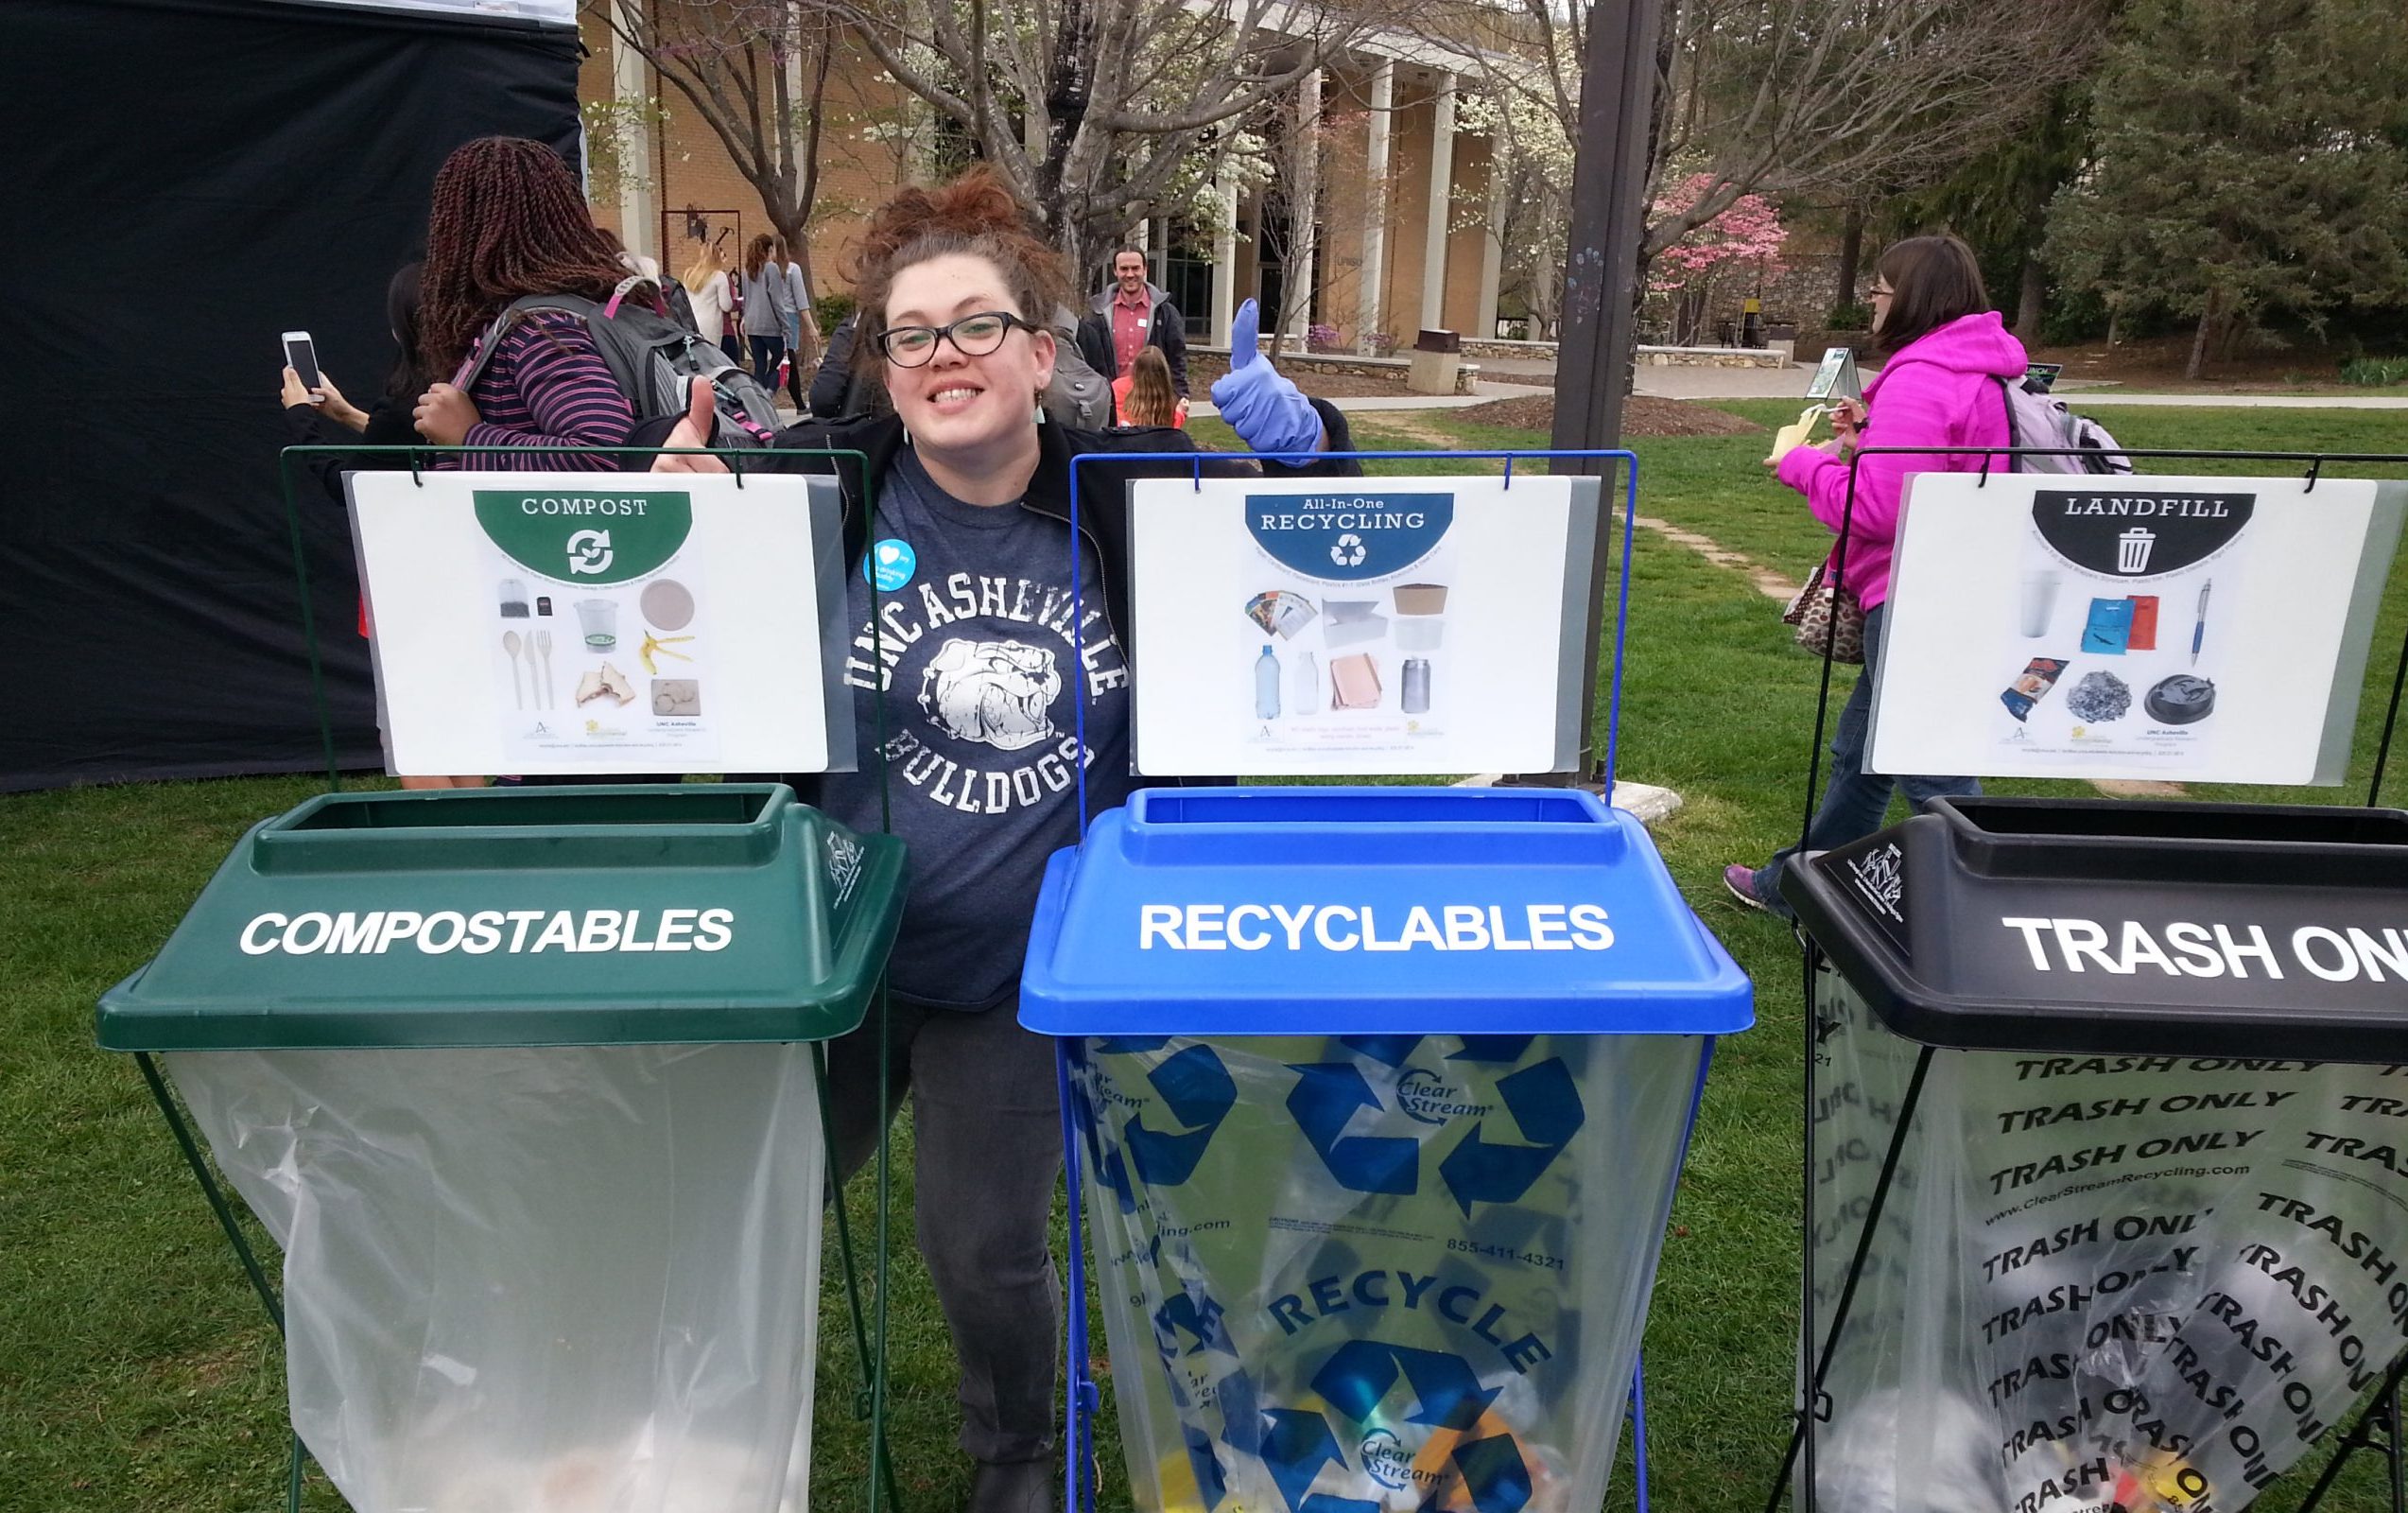 Composting and recycling initiatives